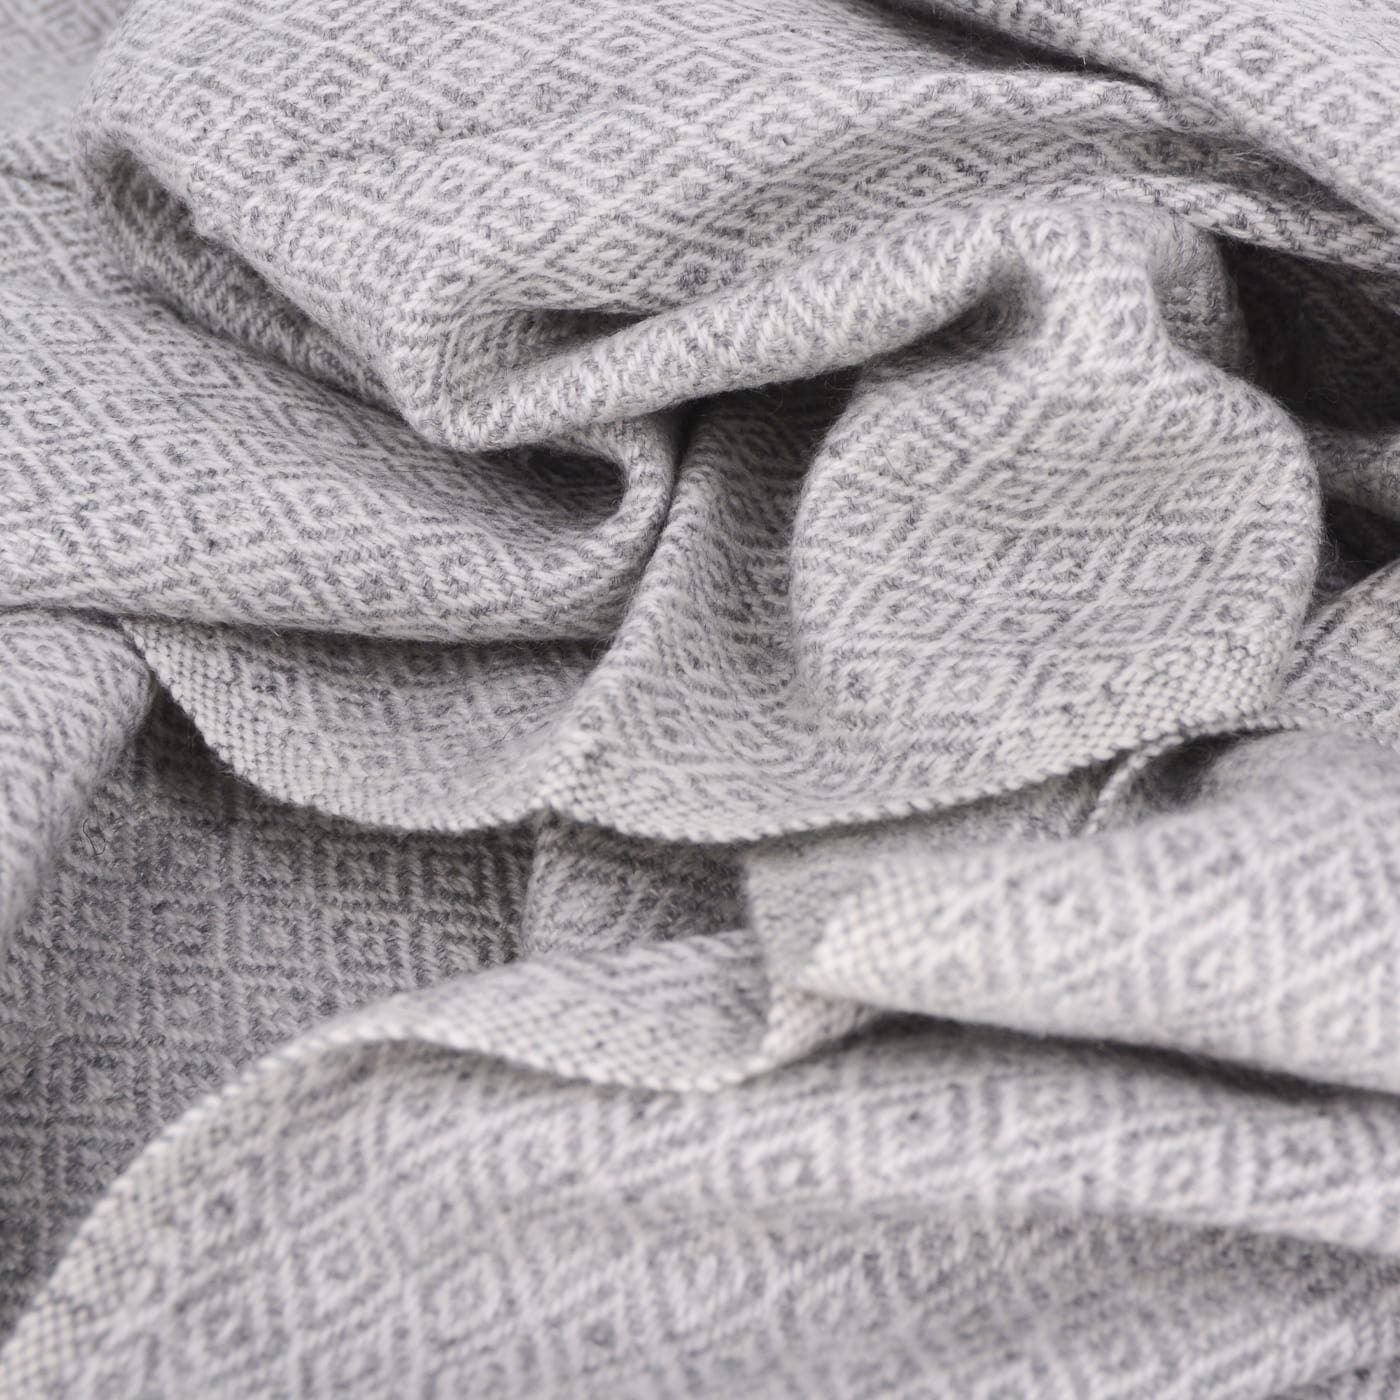 Men's mouse grey cashmere and wool scarf - Diamond pattern